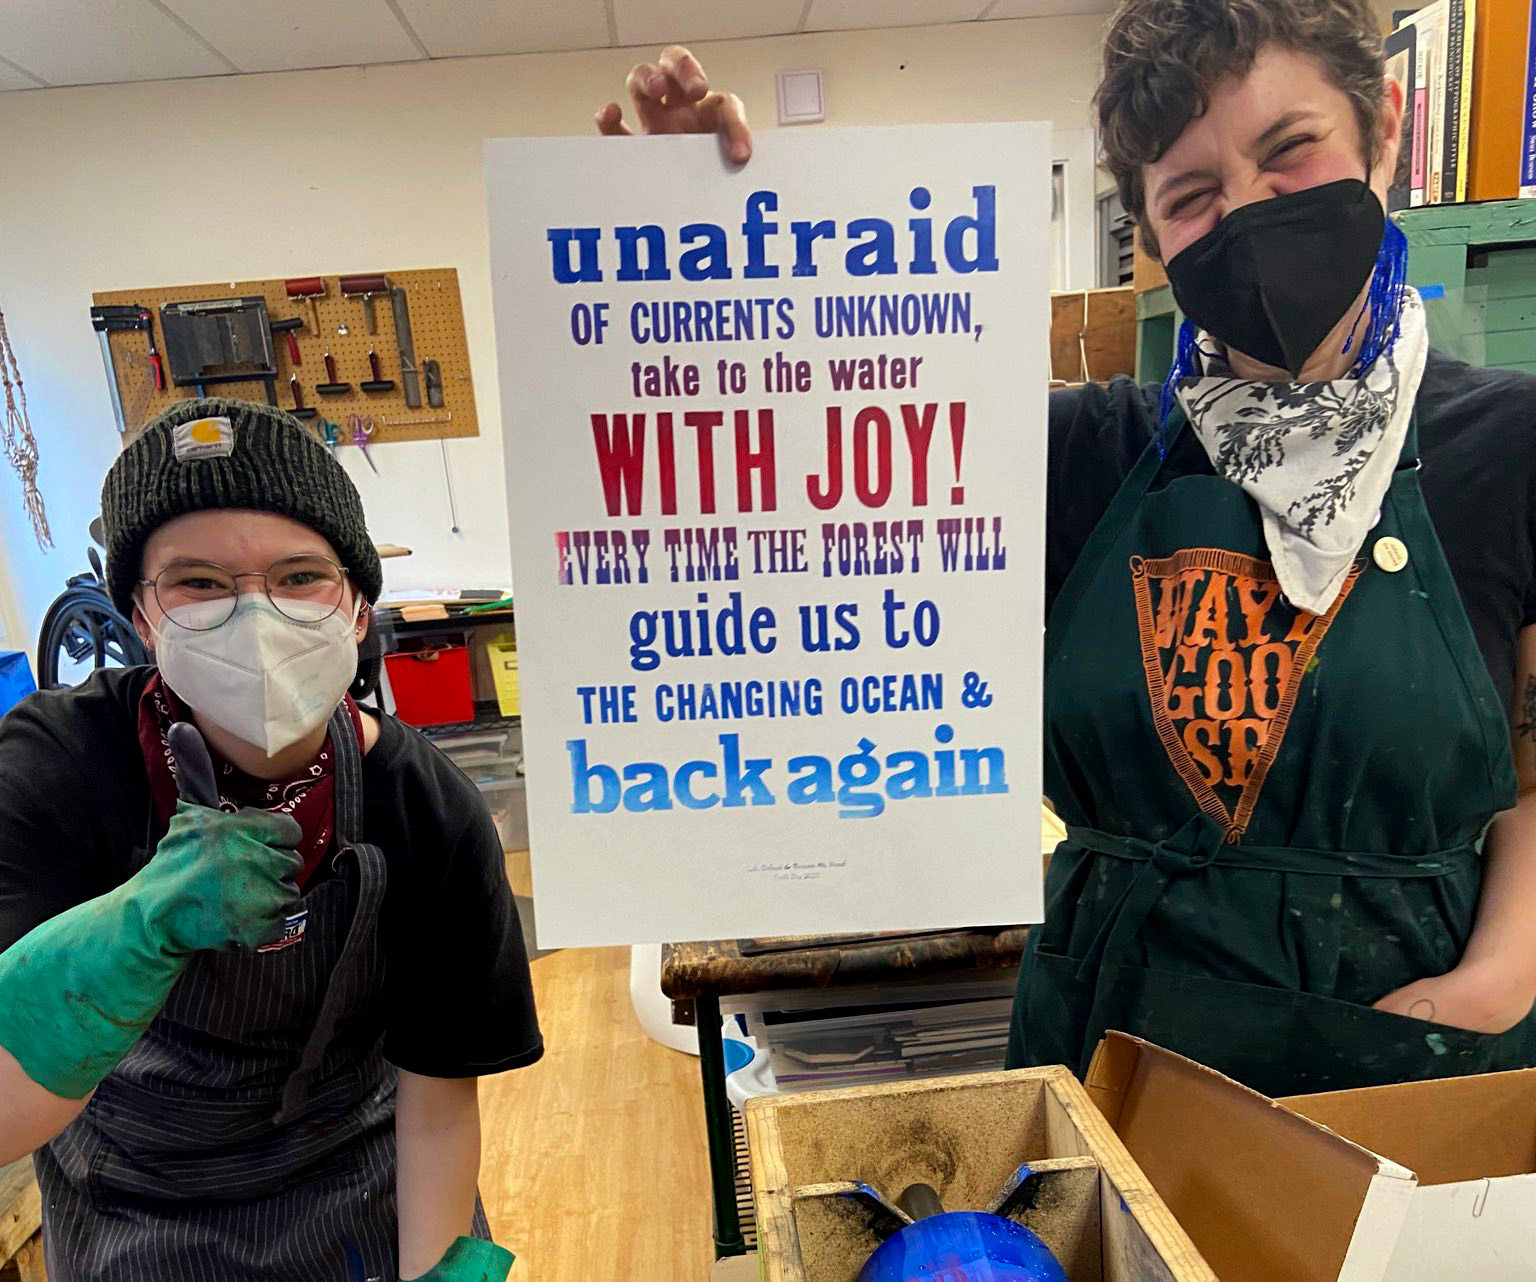 [Two nonbinary individuals (one with a beanie and one with brown hair) are facing the camera and wearing dark clothing, aprons, and gloves. They are holding up a poster printed in a gradient that reads 